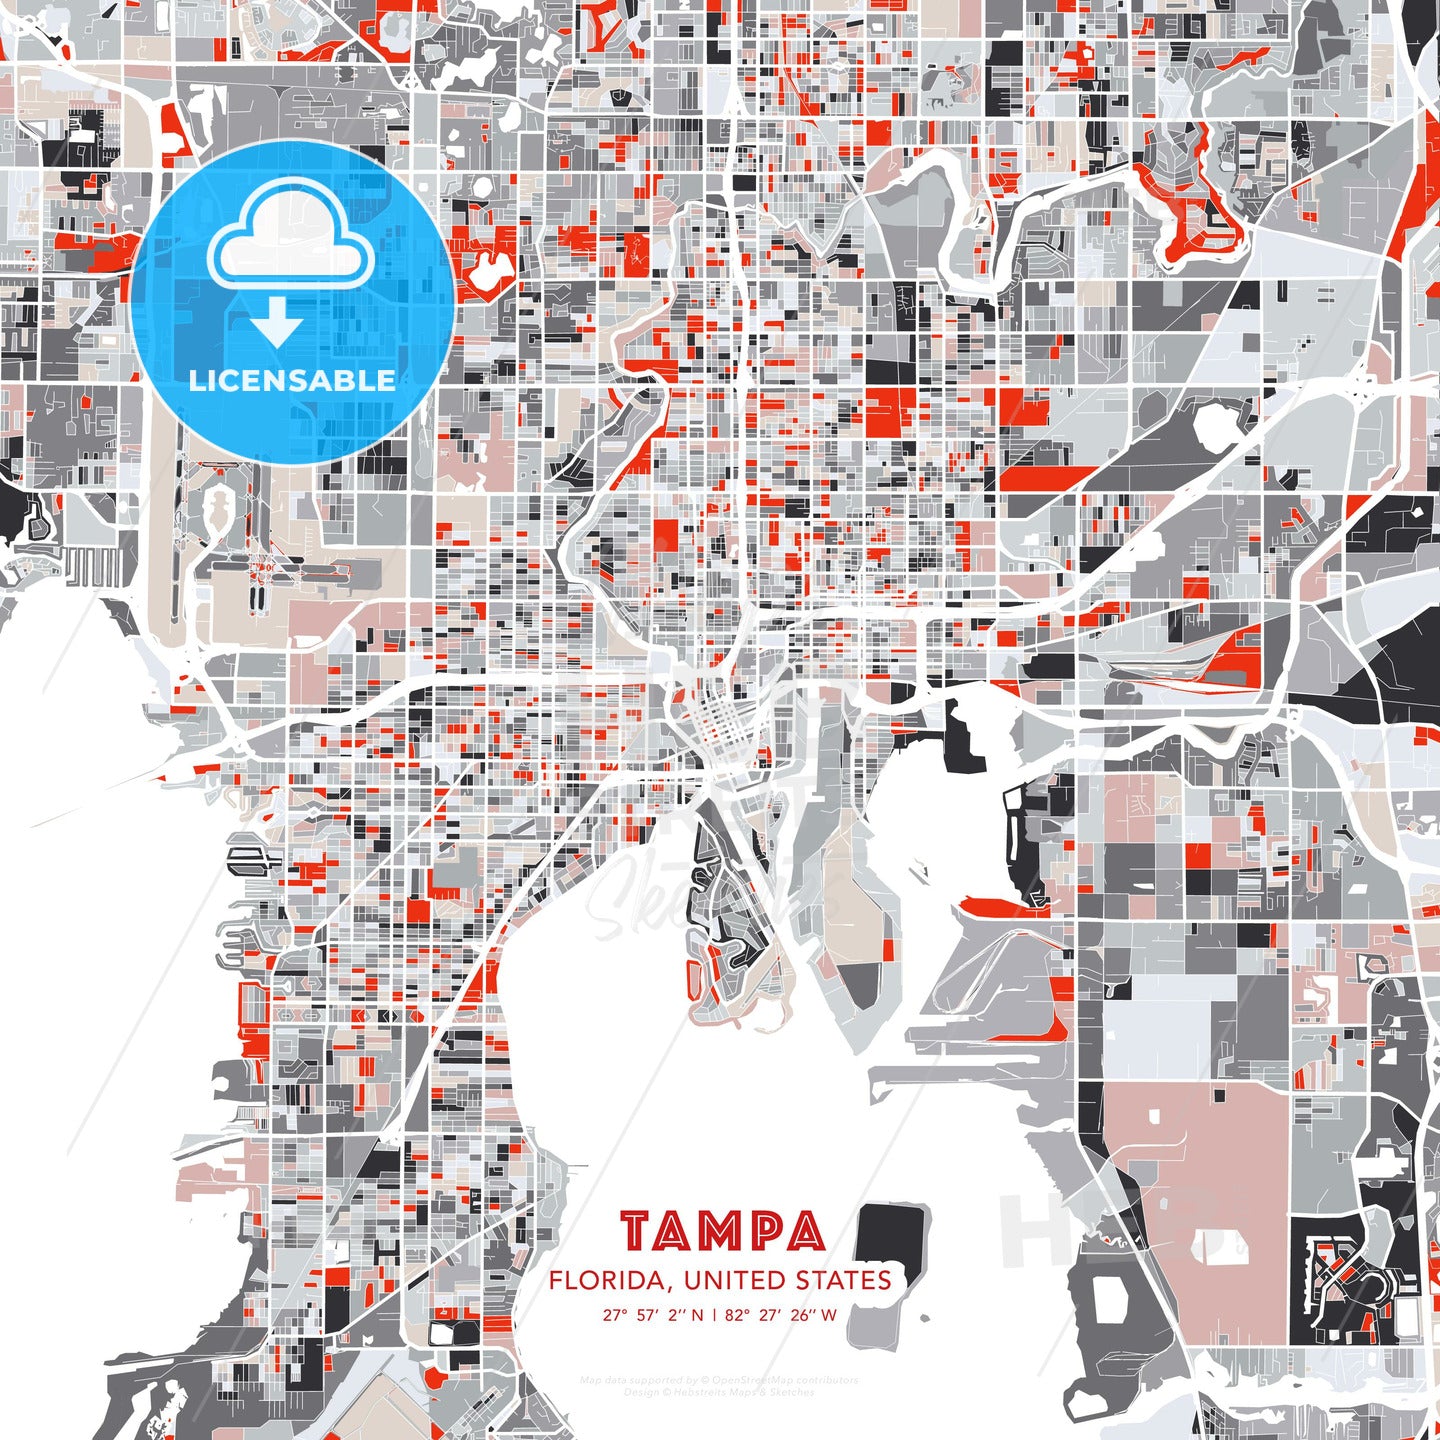 Tampa, Florida, United States, modern map - HEBSTREITS Sketches